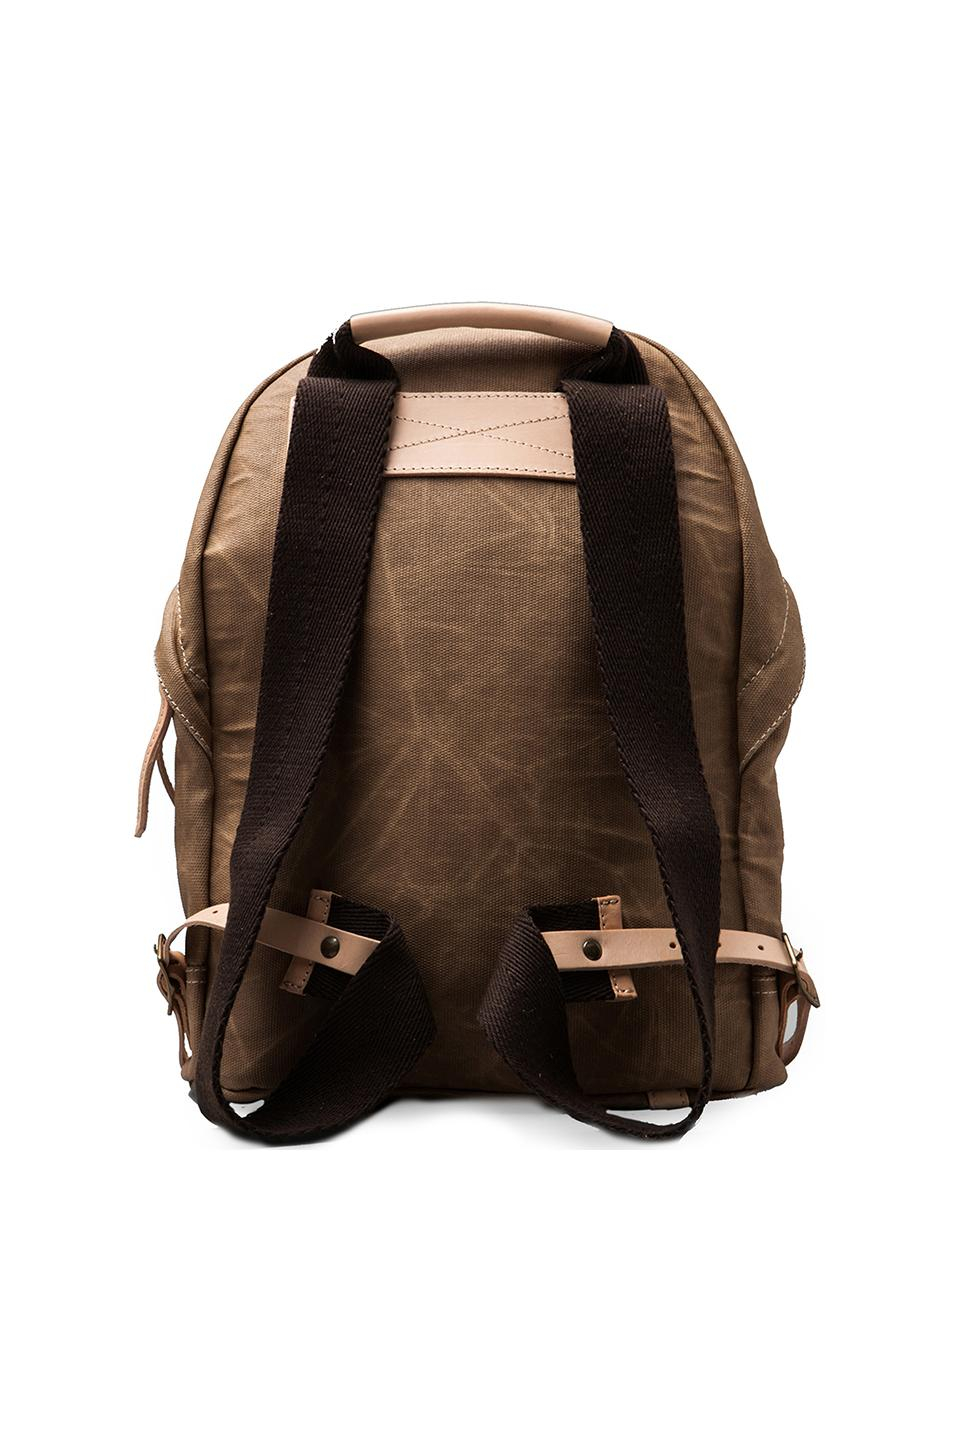 Will Leather Goods Wax Coated Canvas Dome Backpack in Khaki (Brown) - Lyst